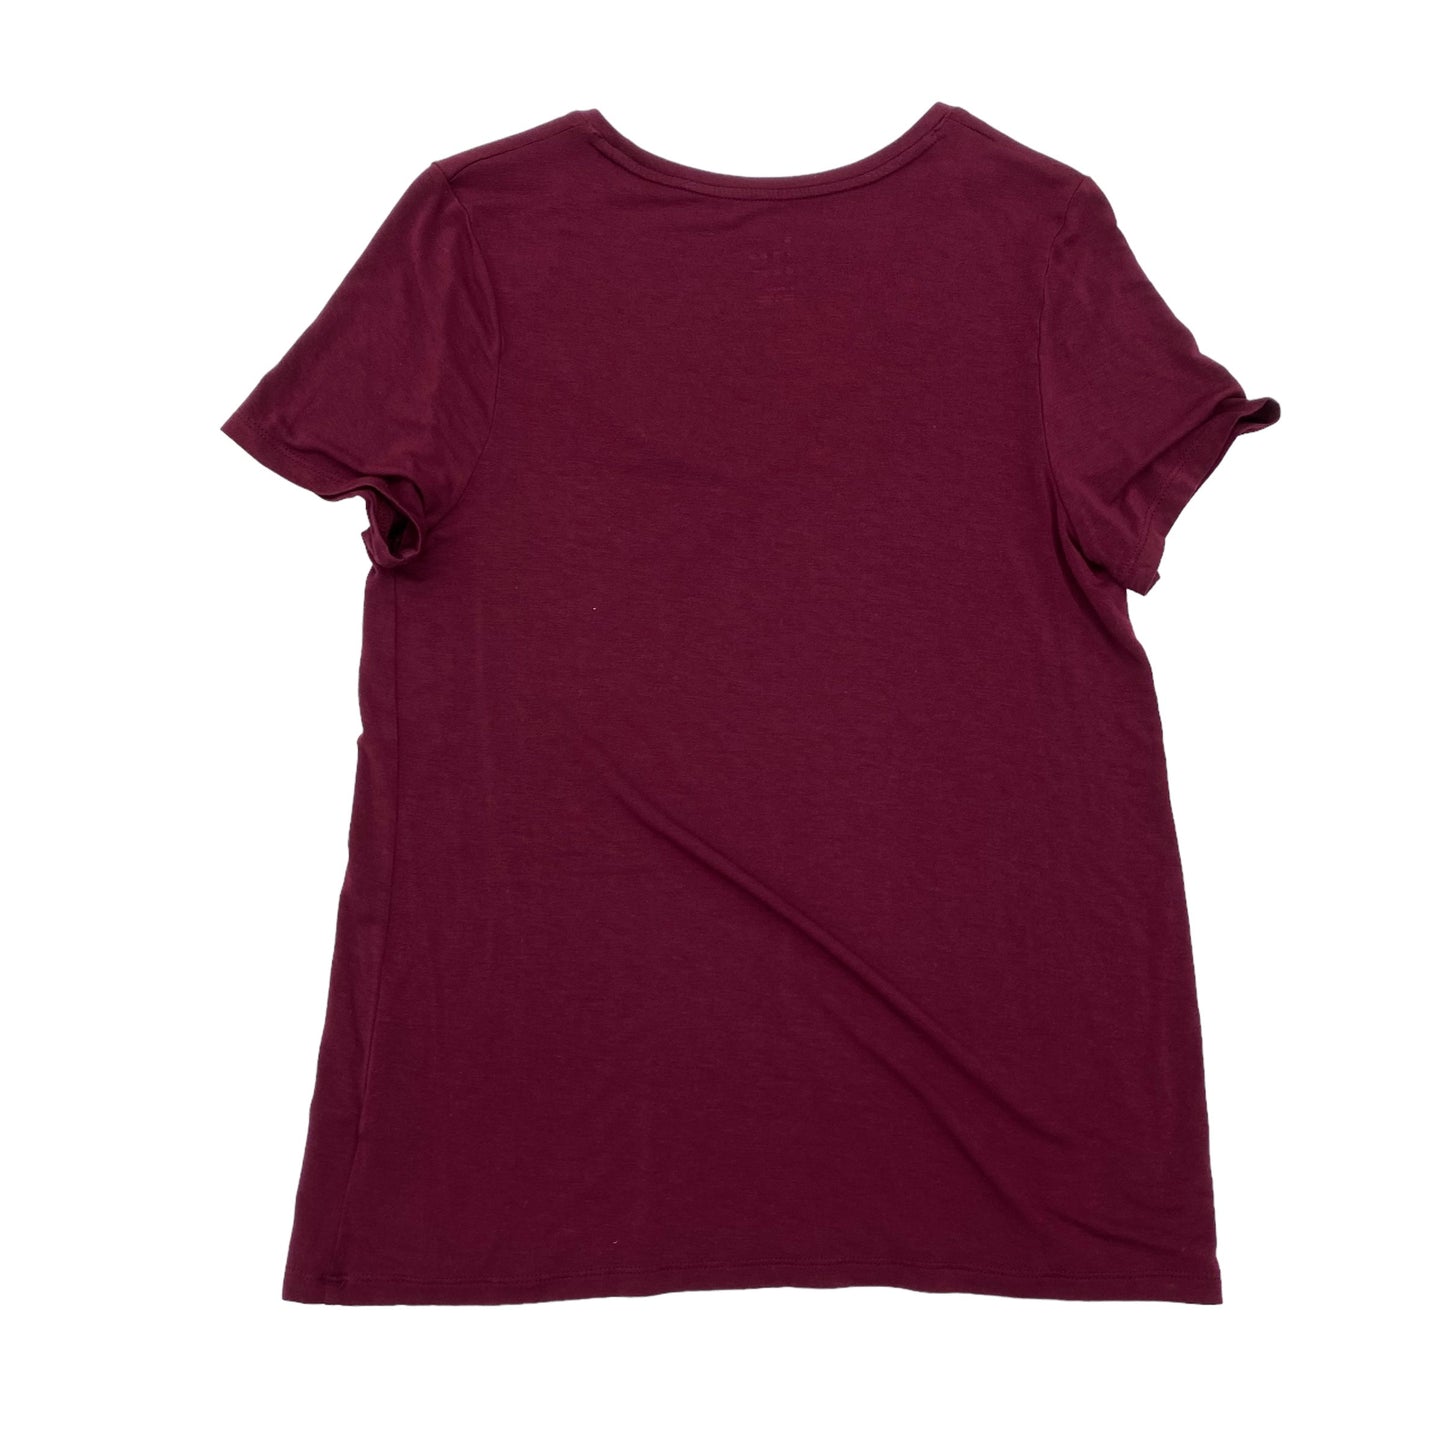 RED A NEW DAY TOP SS BASIC, Size XS